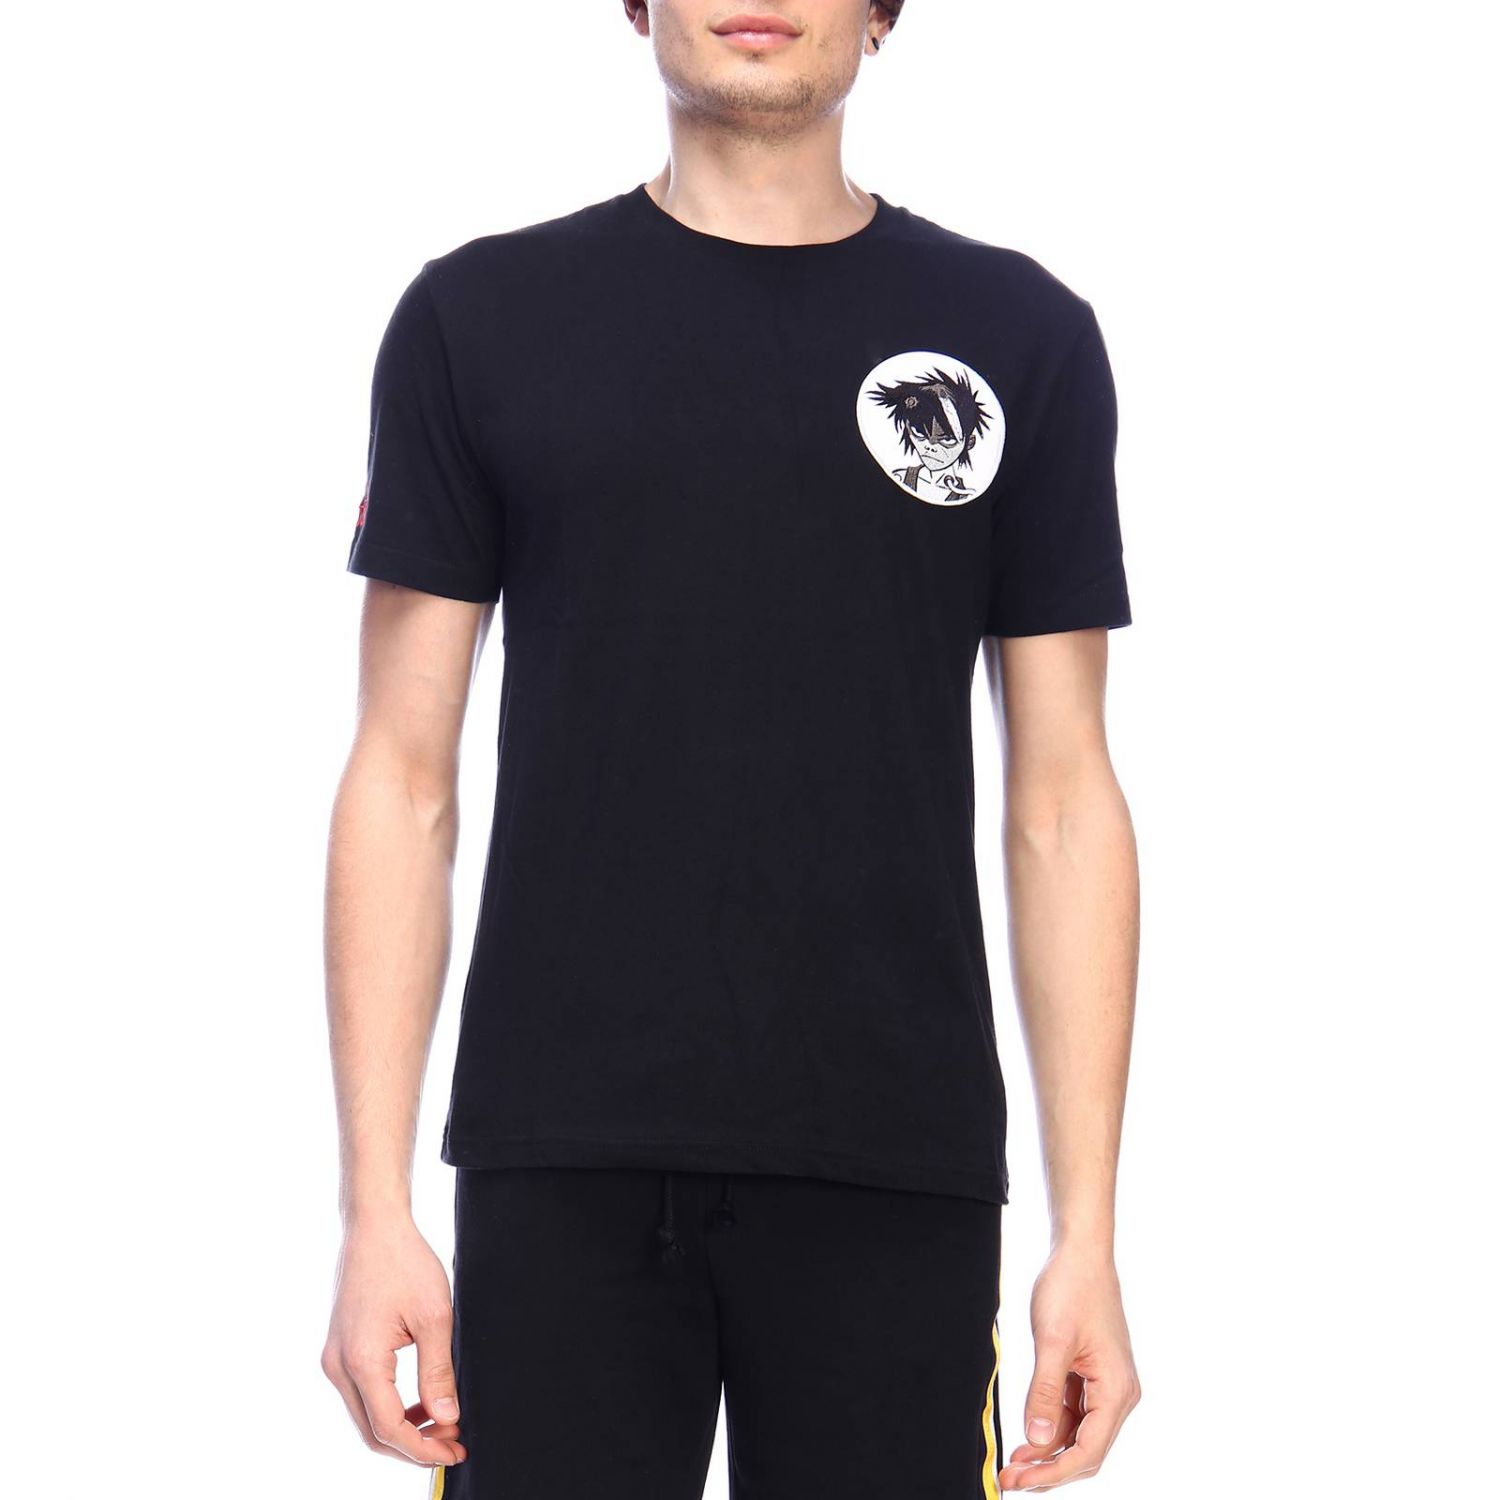 Geym Outlet: t-shirt for man - Black | Geym t-shirt 02 GFOOT online on ...